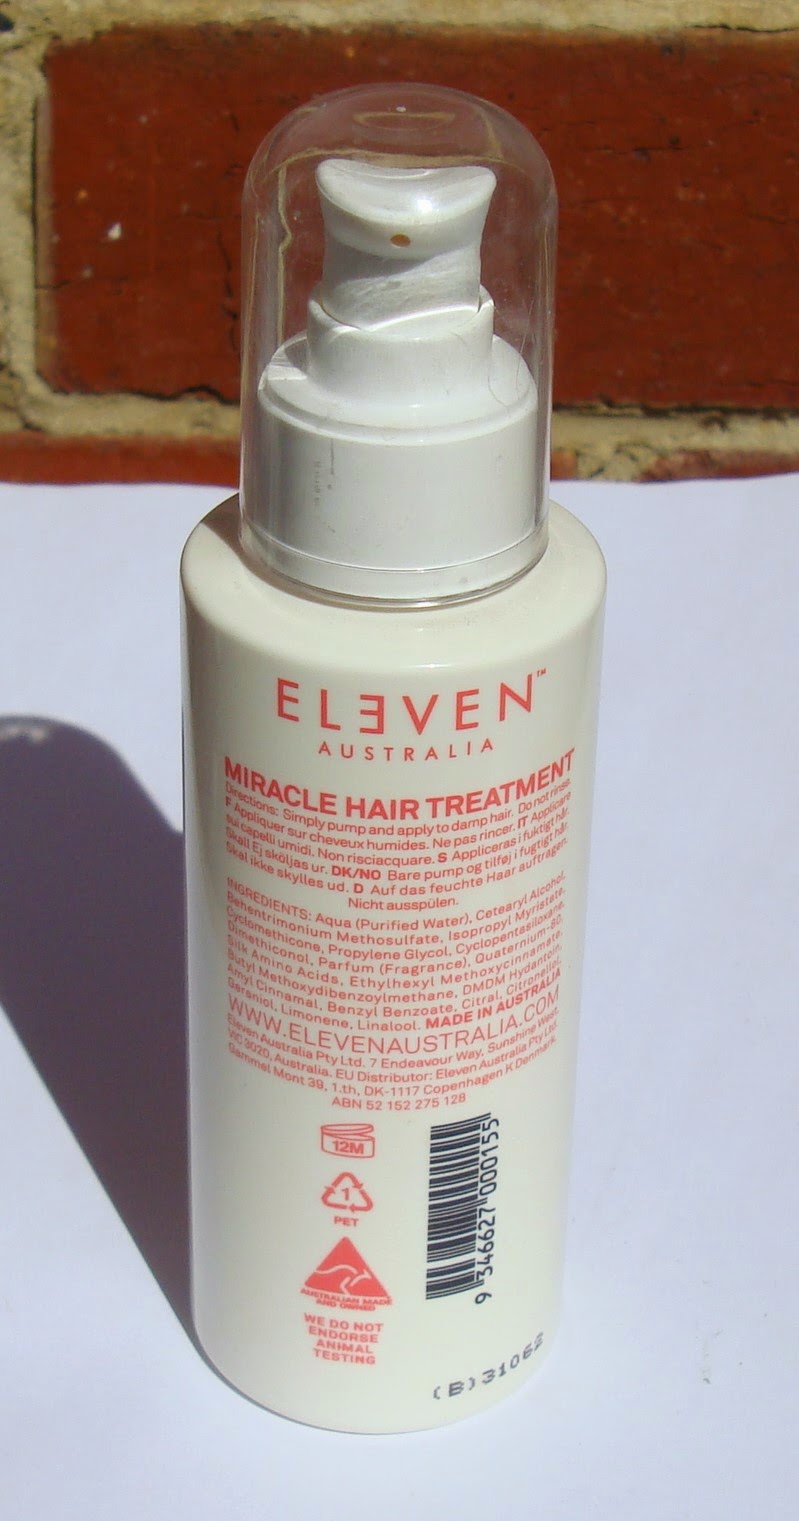 little white truths: Eleven Australia Miracle Hair Treatment - review